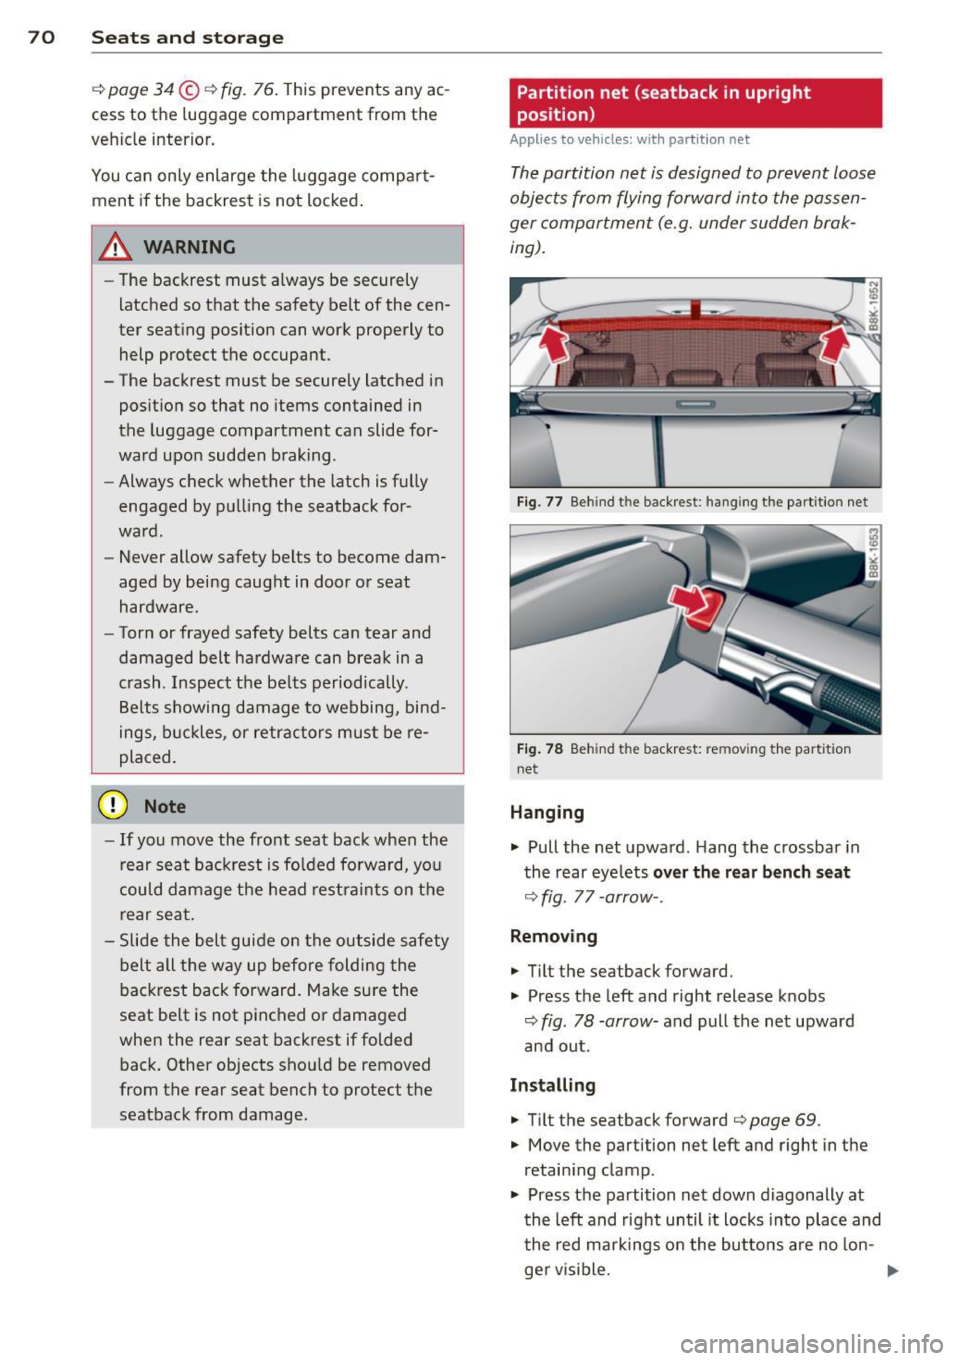 AUDI A4 2013  Owners Manual 70  Seats  and storage 
.::> page  34 ©.::>fig. 76.  This prevents  any  ac­
cess  to  the  luggage compartment  from the 
vehicle  interior. 
You can  only  enlarge the luggage  compart­
ment  if 